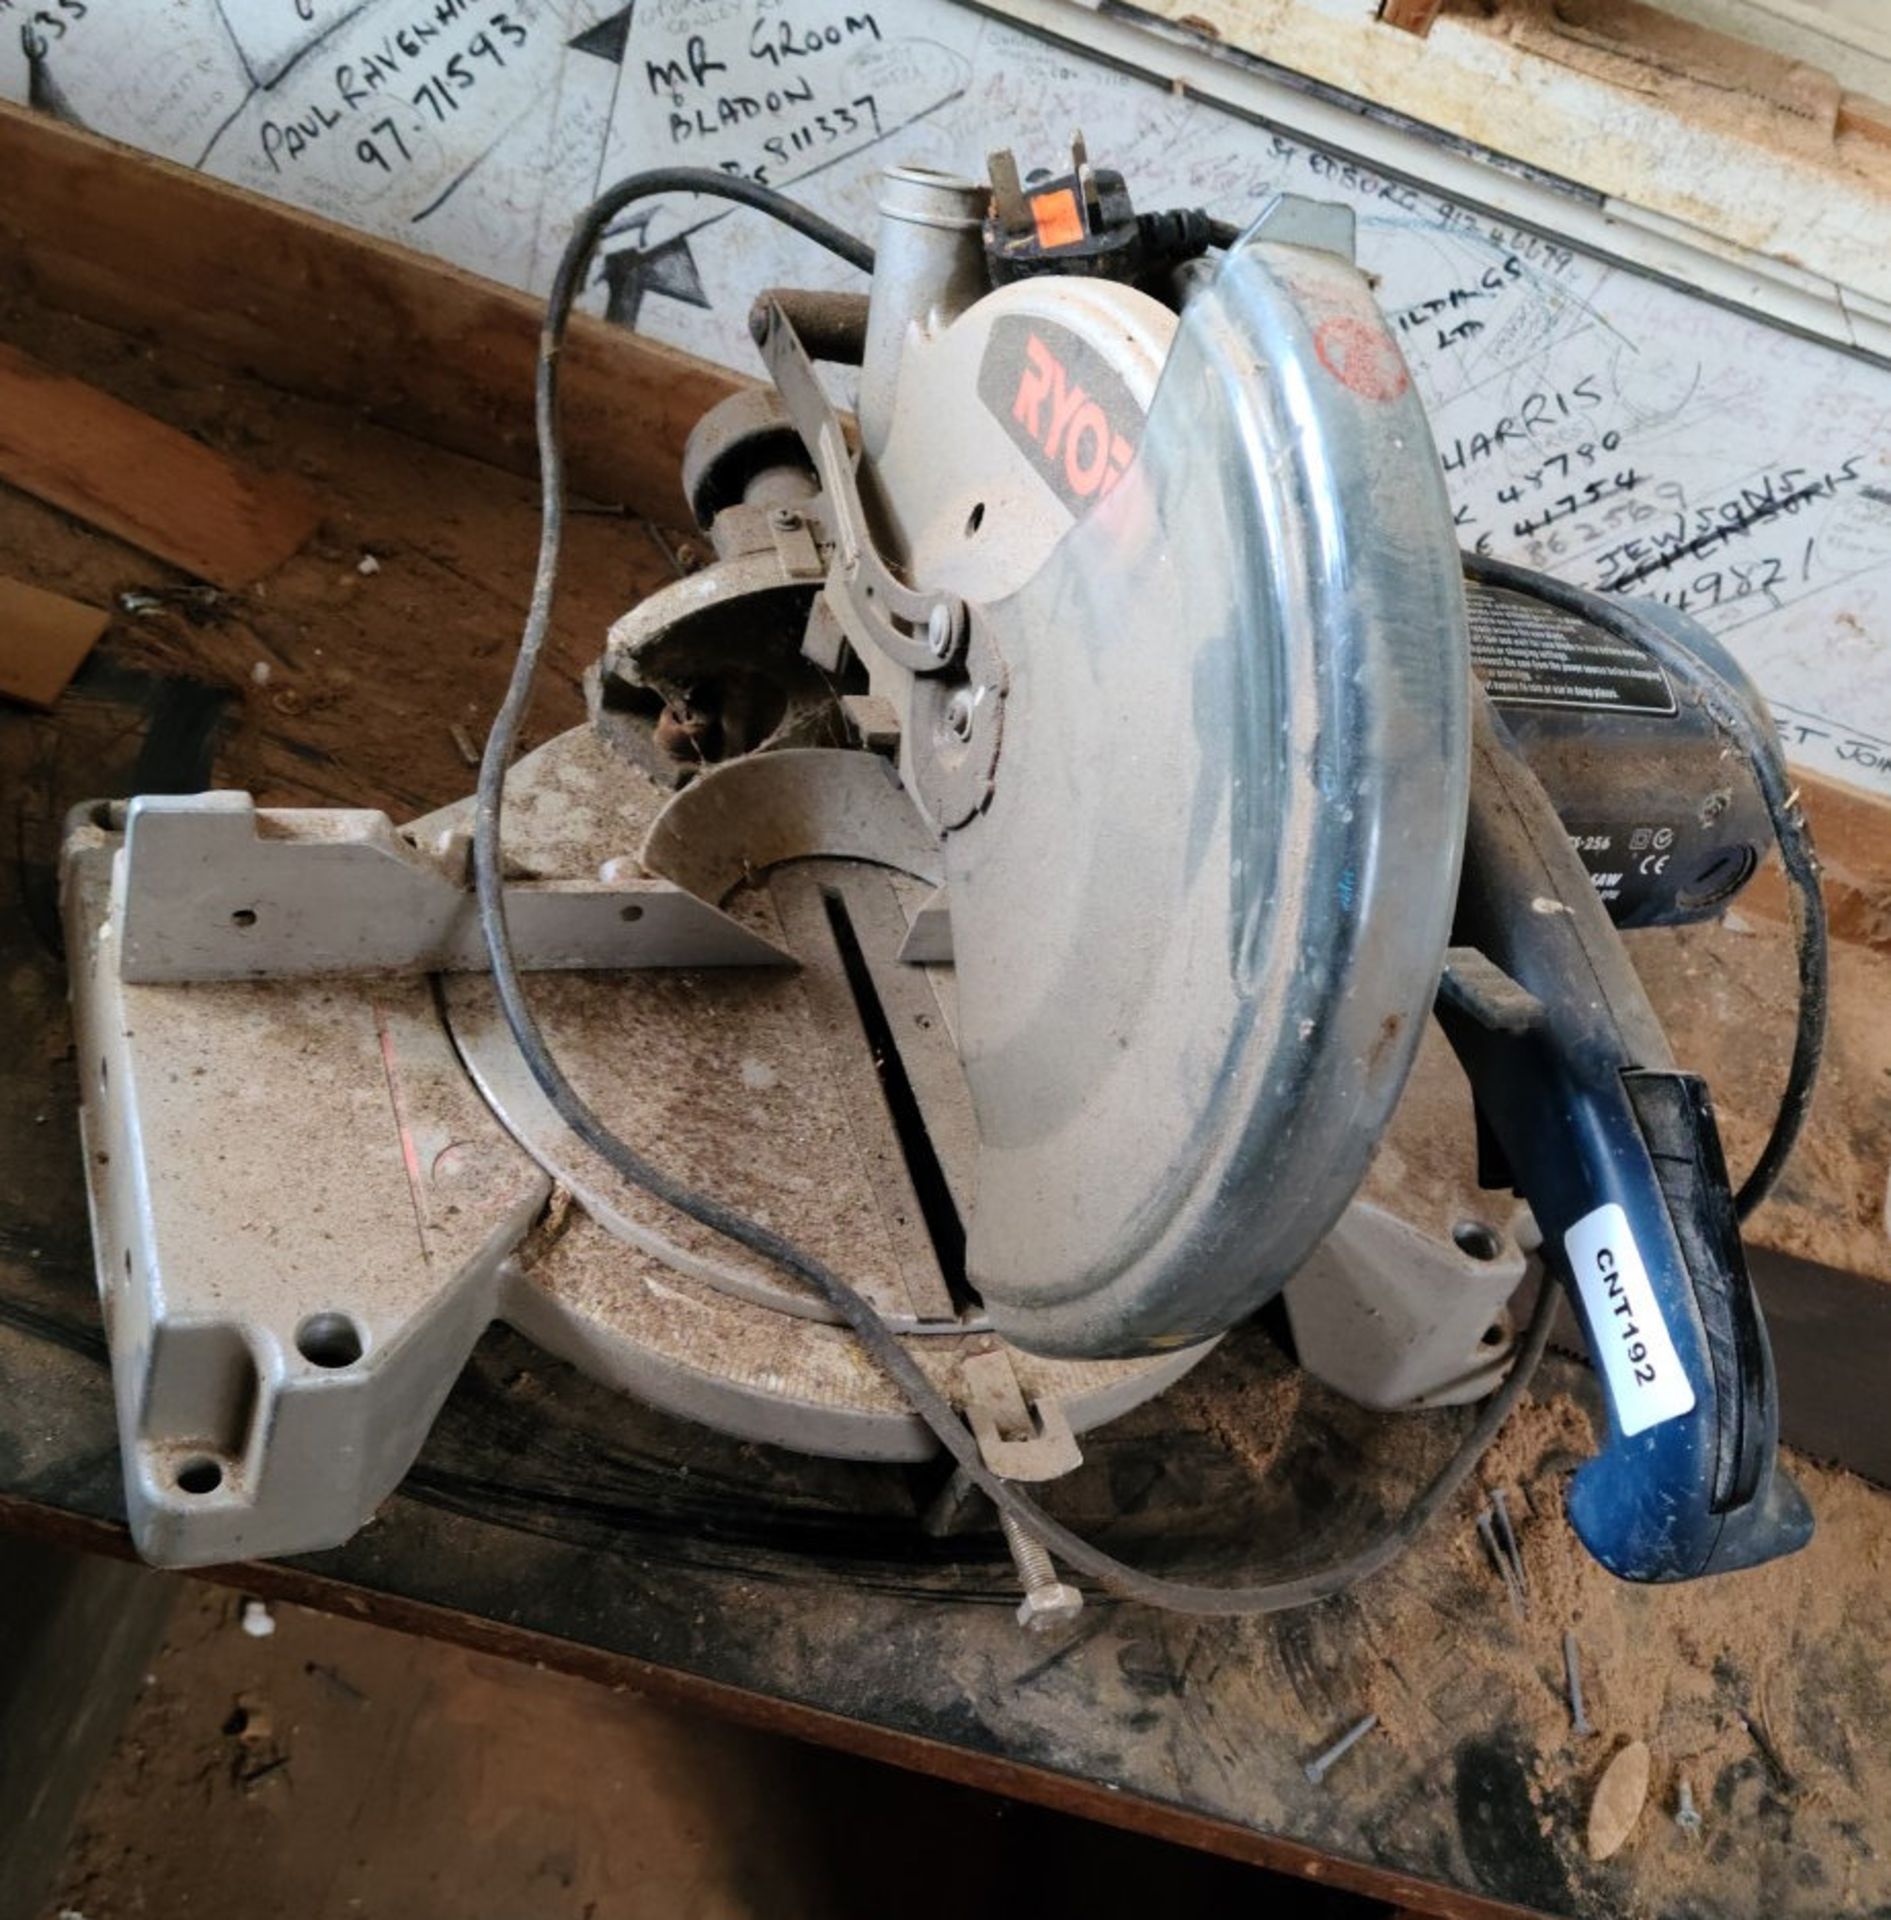 1 x Ryobi Ts-256 254Mm (10") Compound Mitre Saw - Ref: CNT192 - CL846 - Location: Oxford OX2This lot - Image 2 of 4